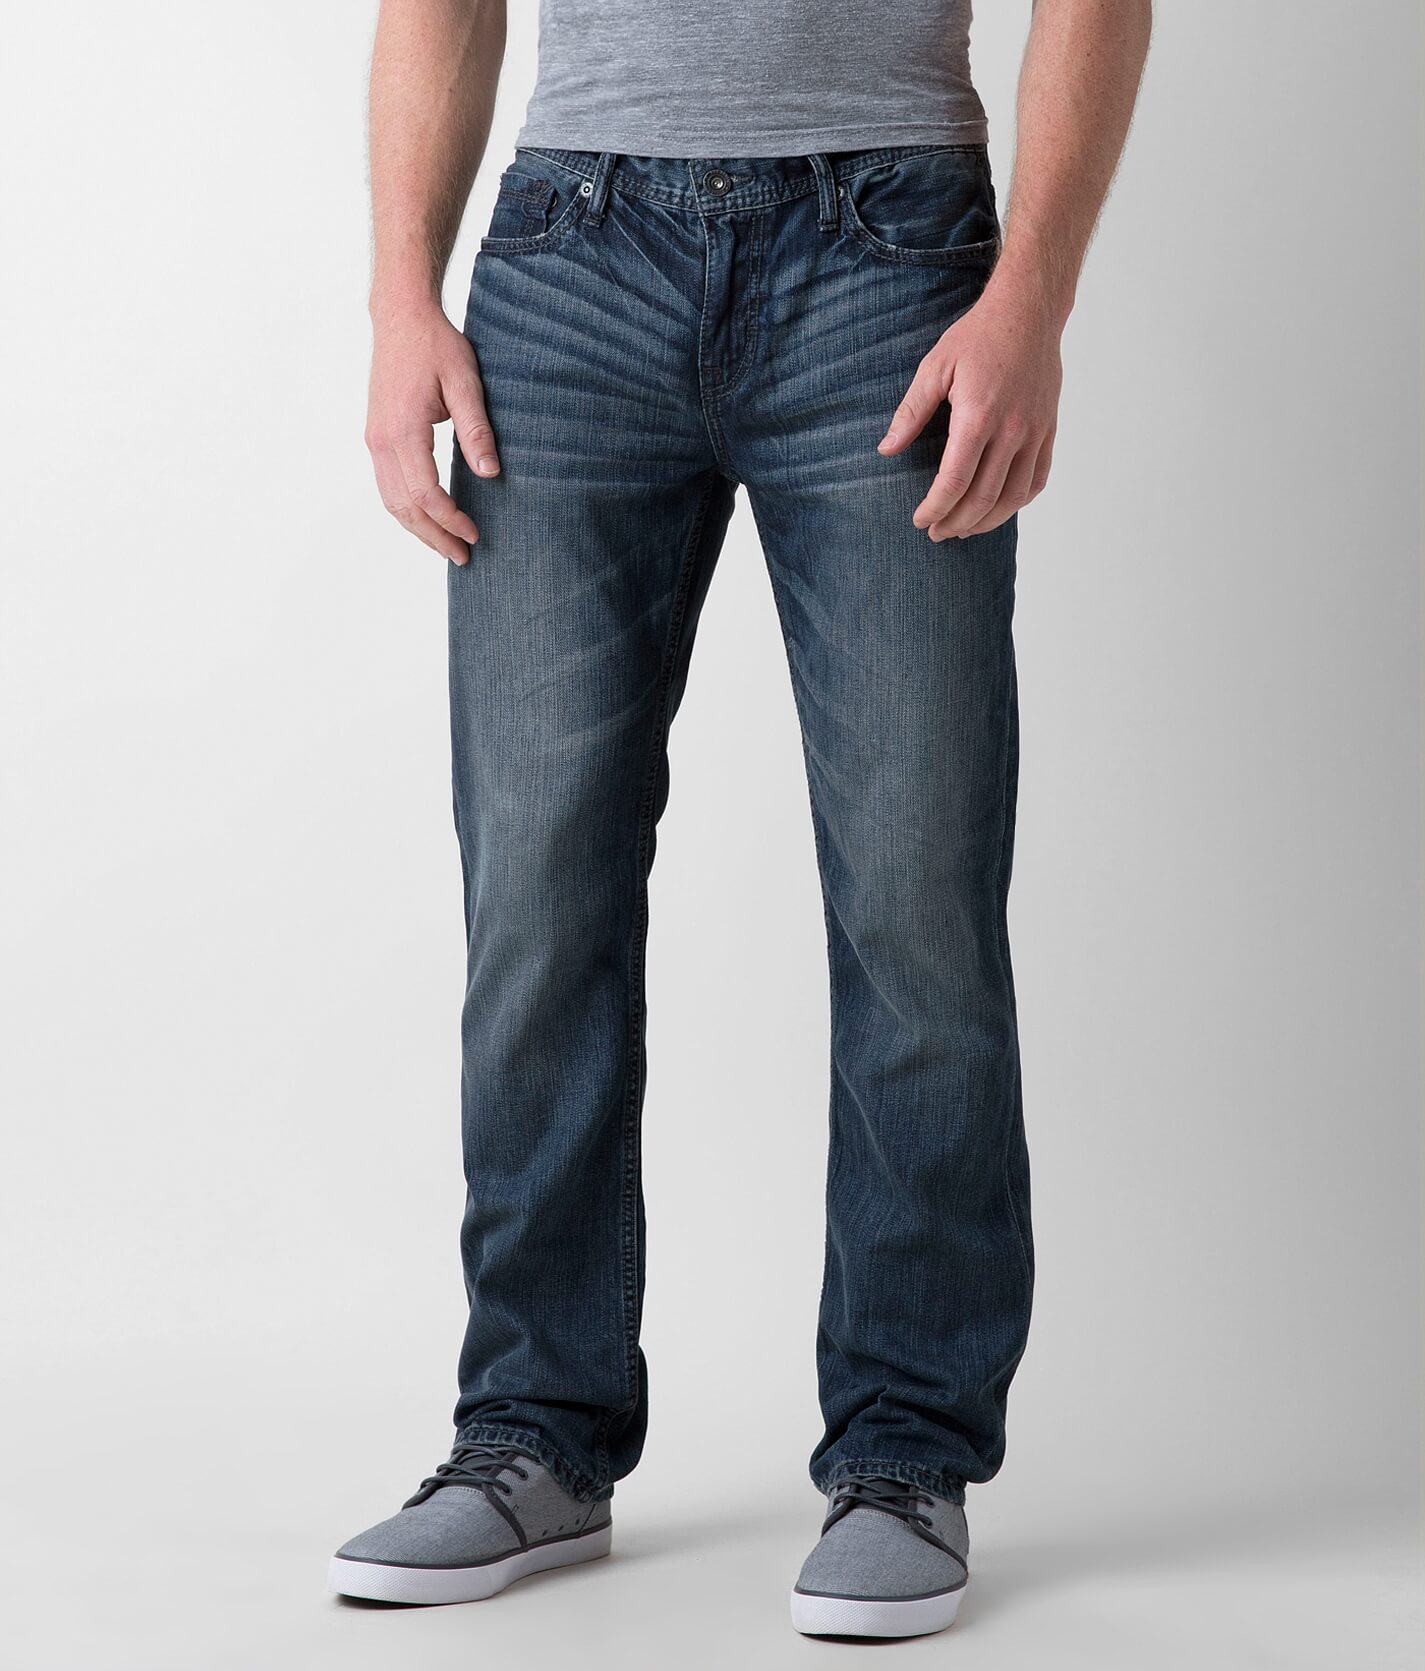 buckle aiden jeans